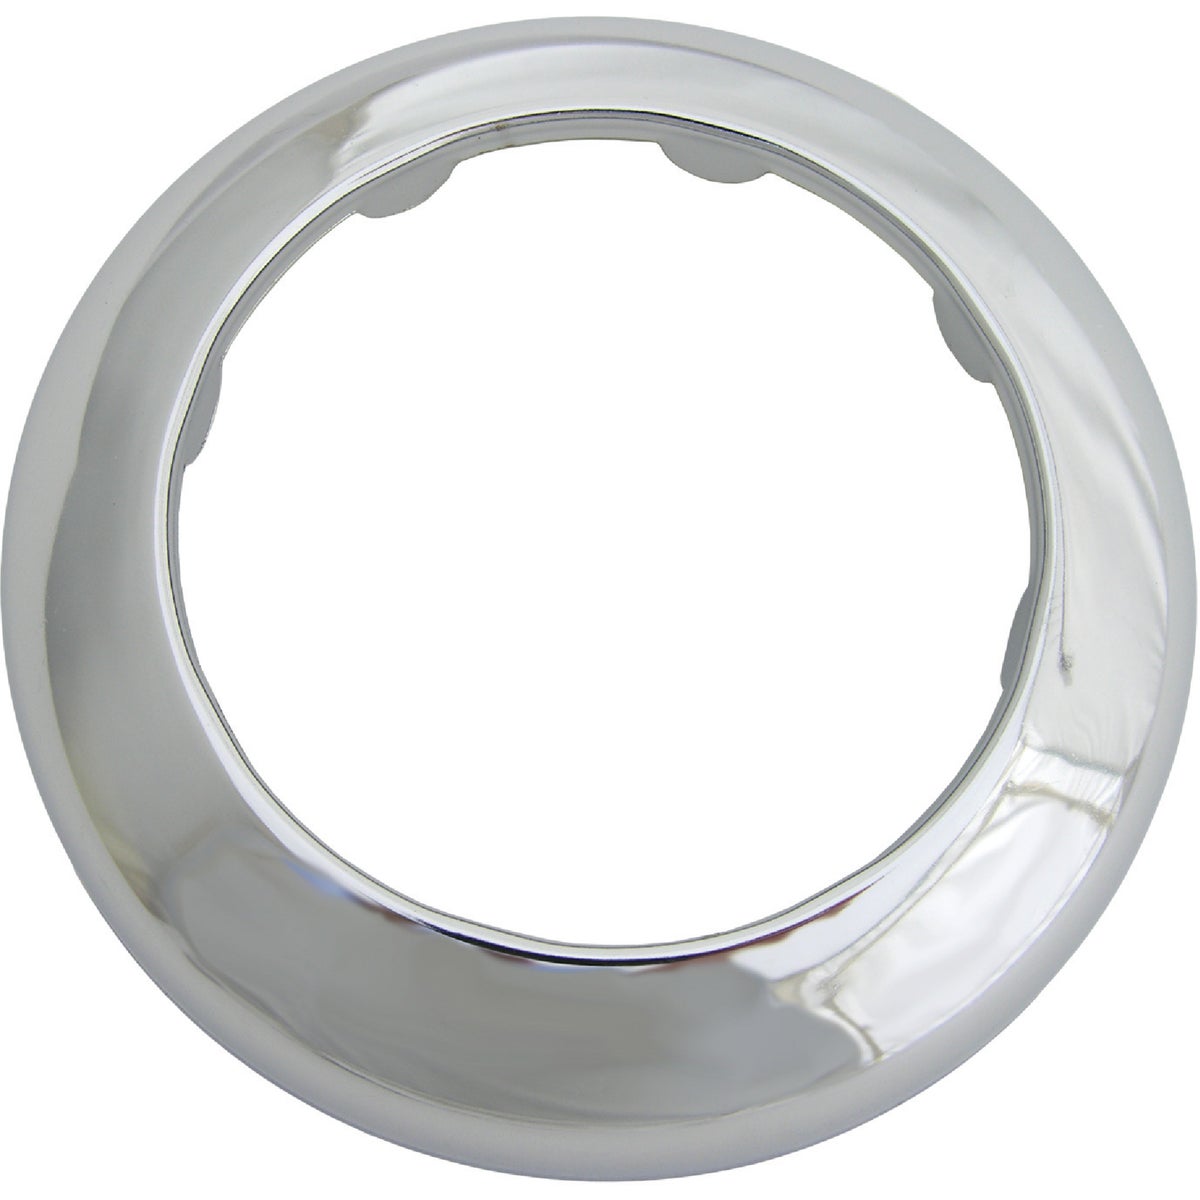 Lasco 2 In. IP Chrome Plated Flange